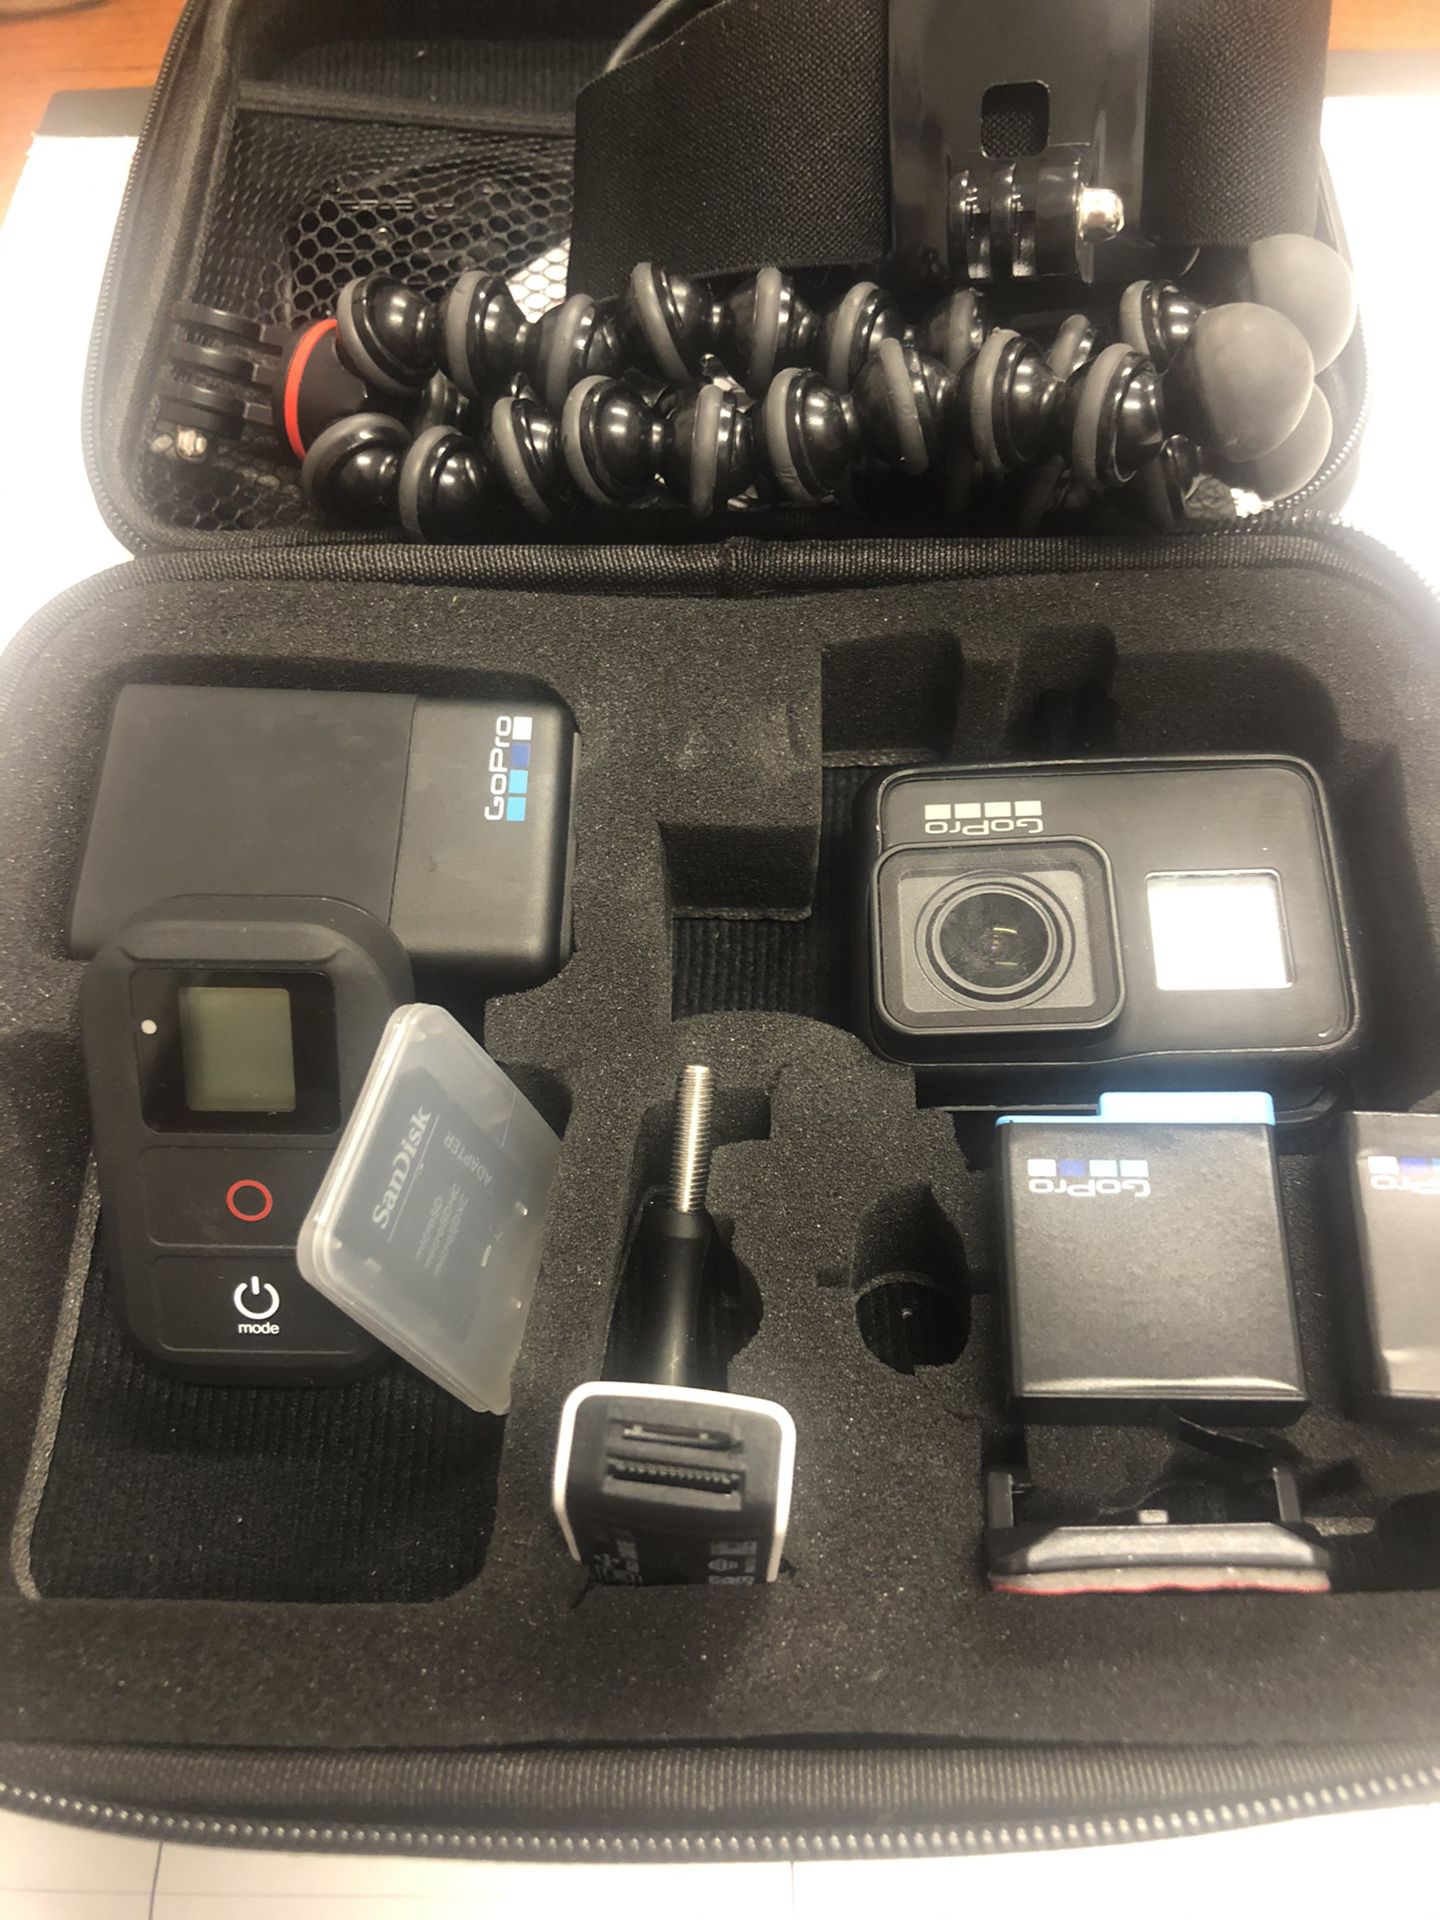 GoPro Hero 7 Black batteries, Dual battery charger, usb, scndisk, Jobe tripod, head carrier and case